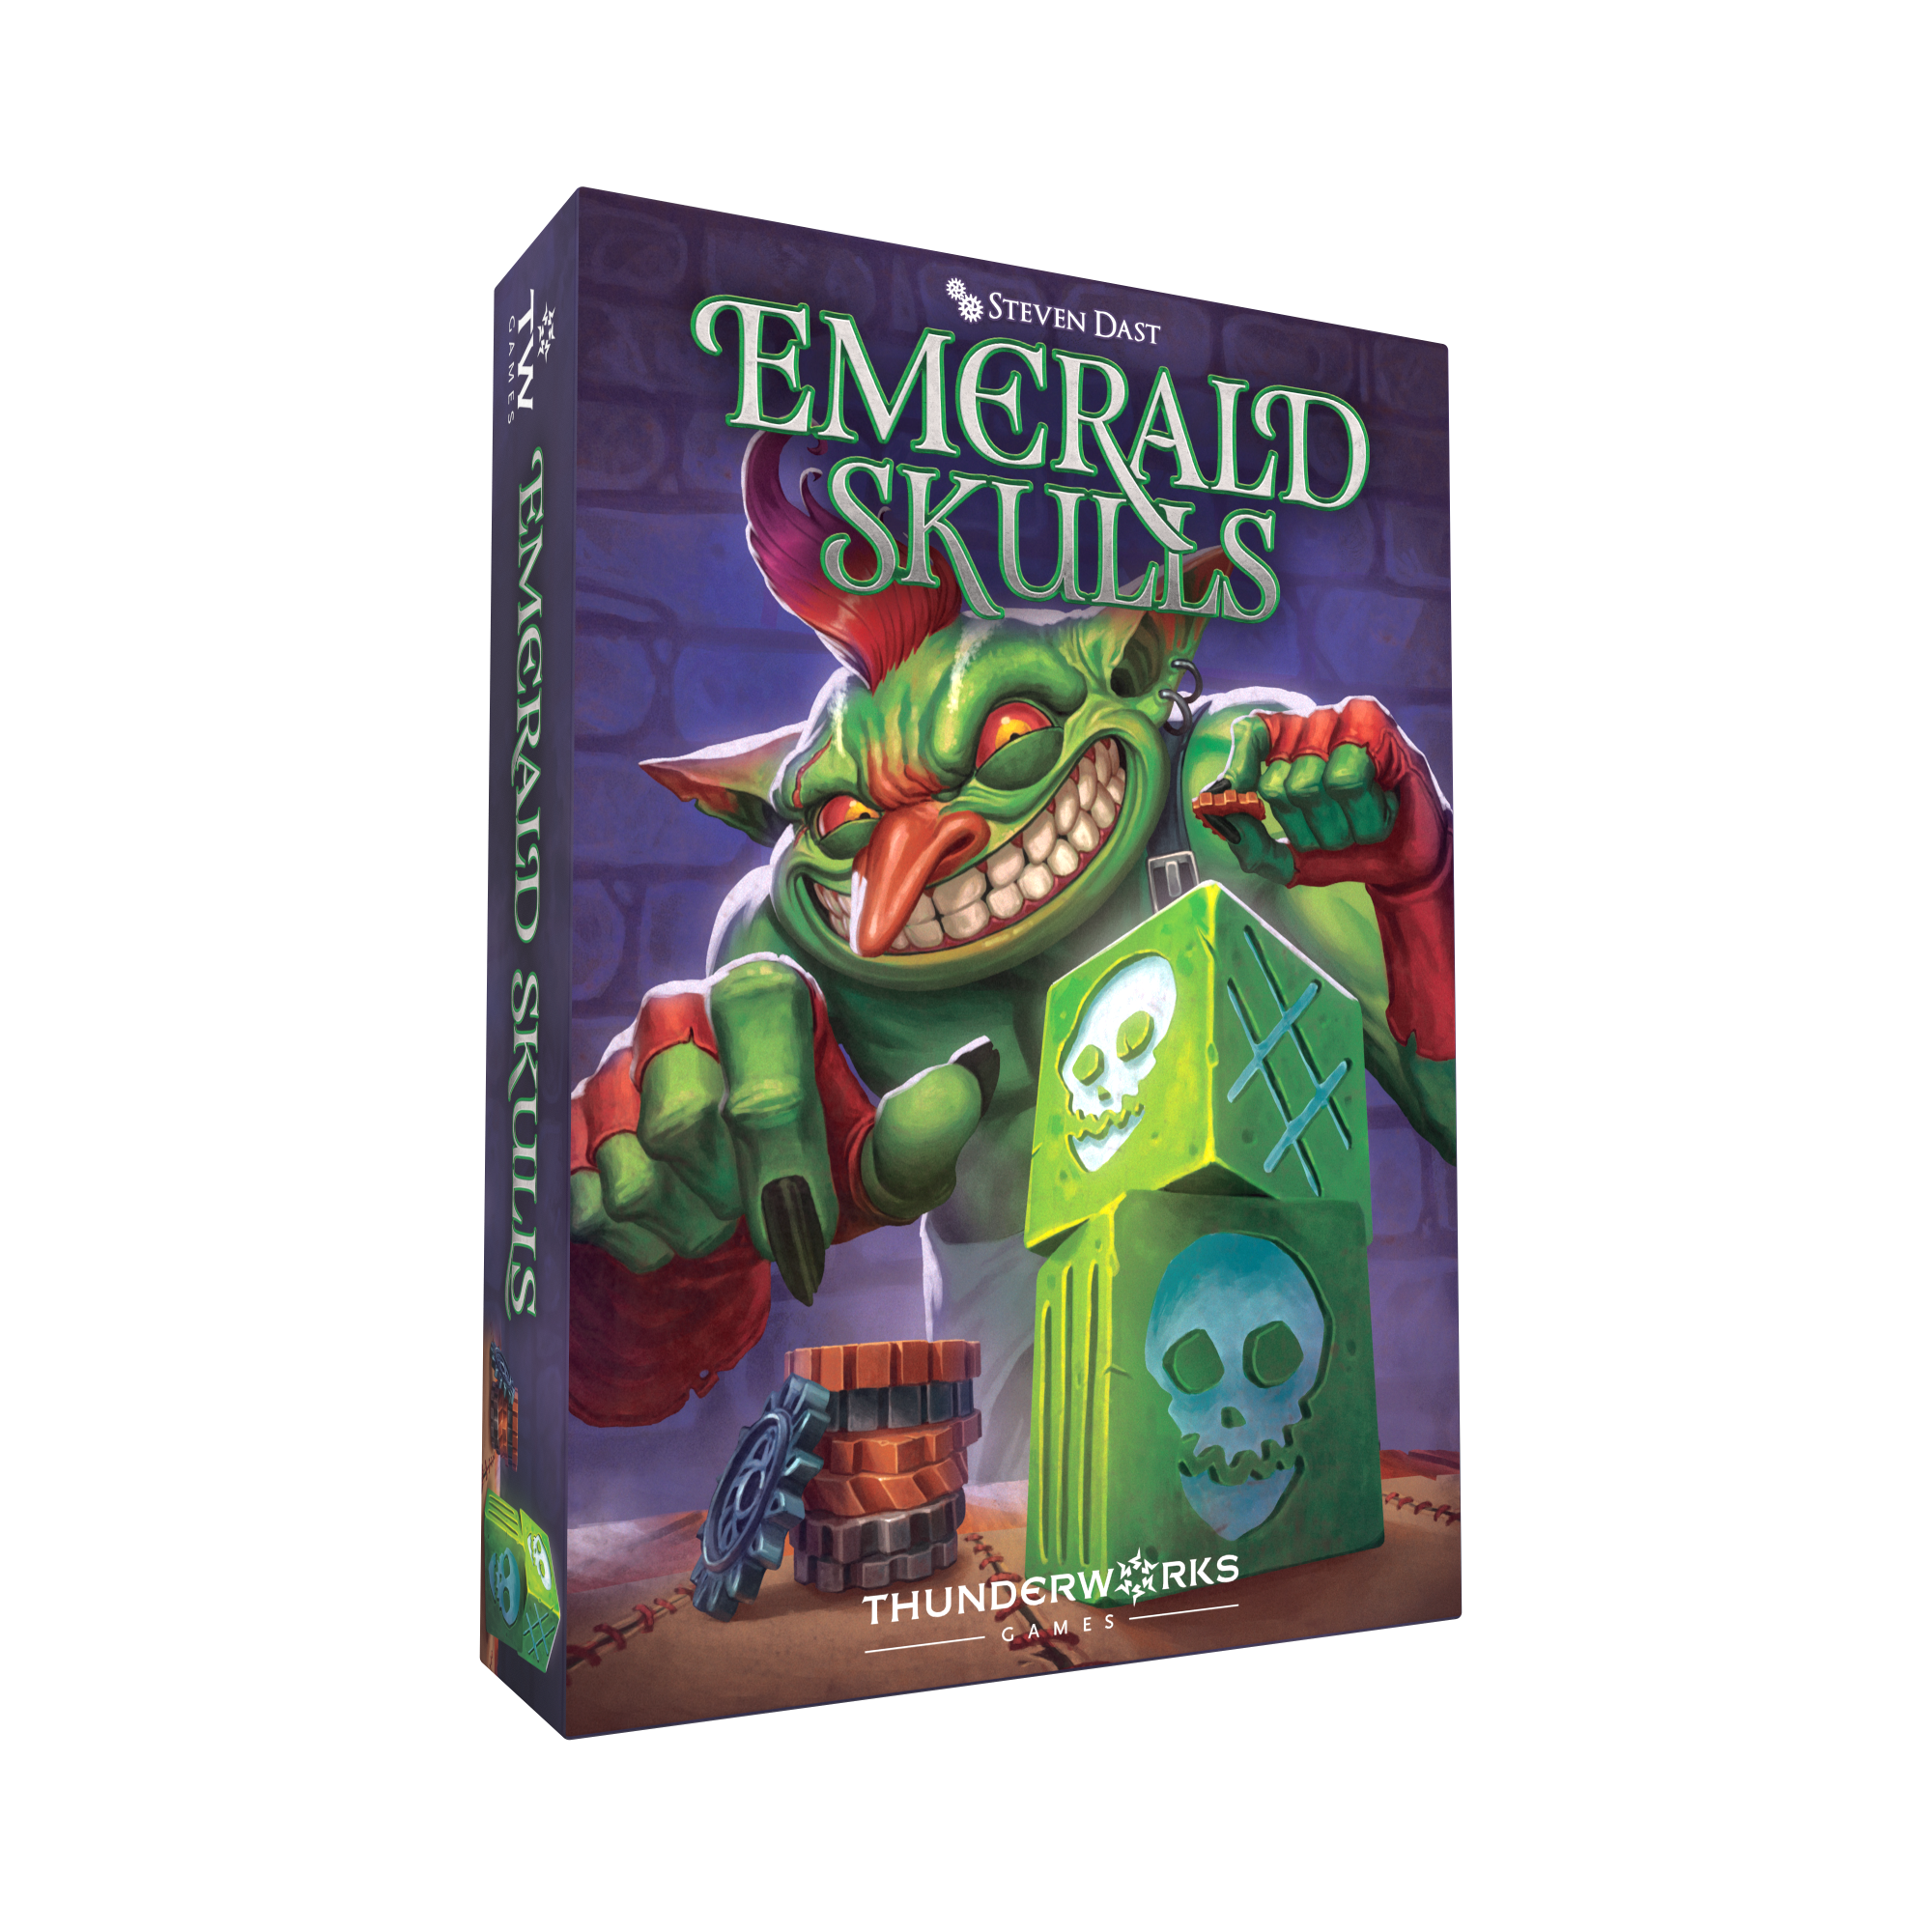 Emerald Skulls board game box with illustration of a green goblin playing with dice and gears